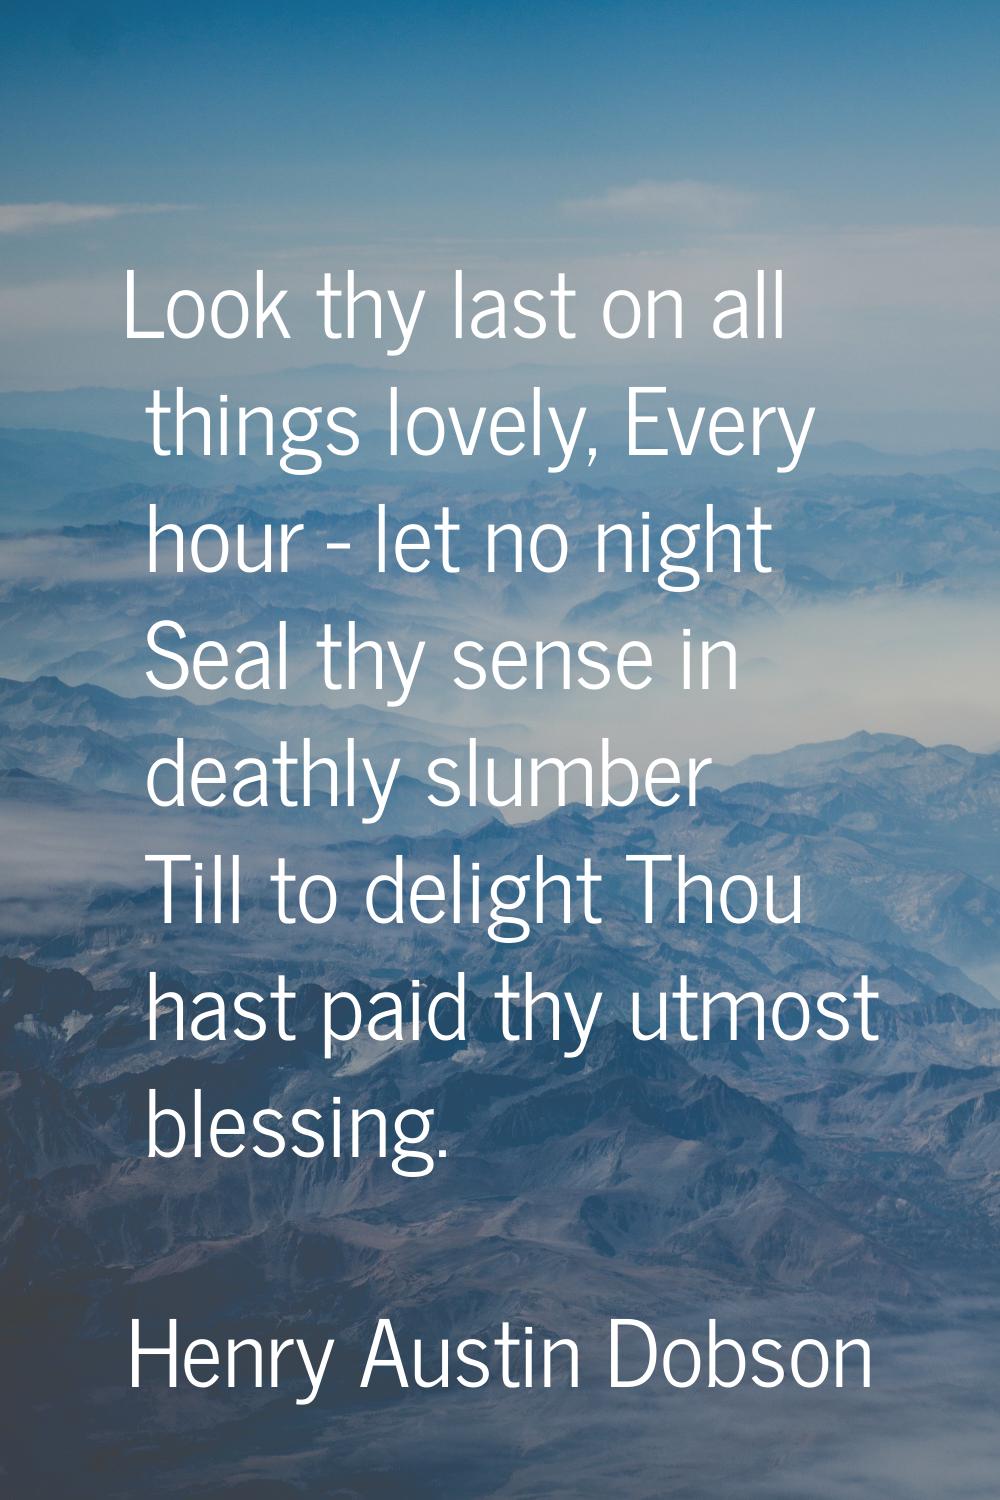 Look thy last on all things lovely, Every hour - let no night Seal thy sense in deathly slumber Til